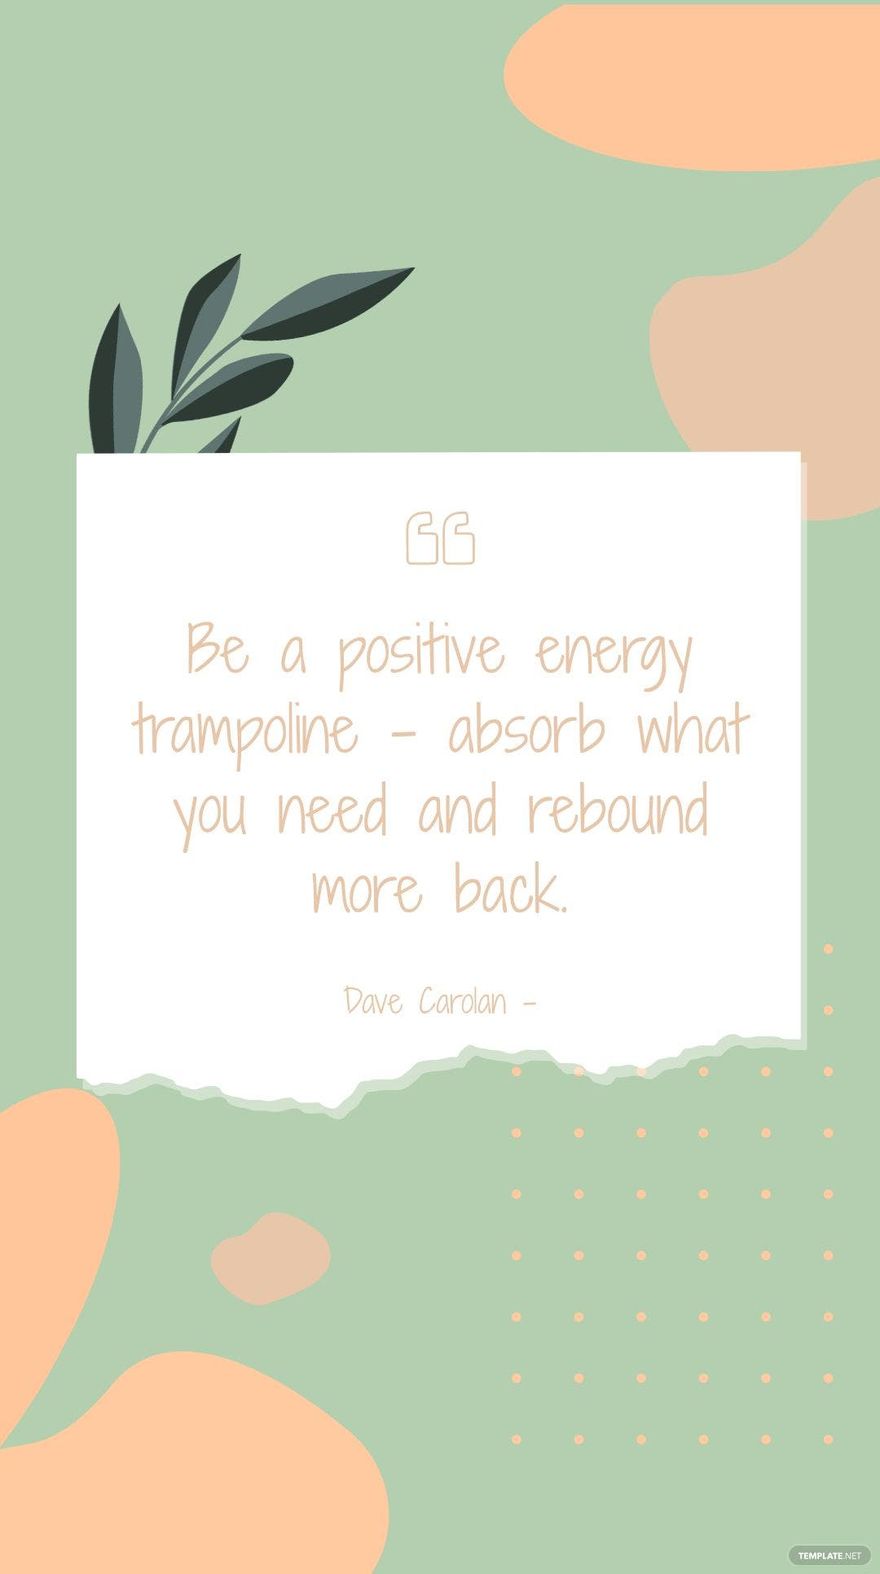 Dave Carolan - Be a positive energy trampoline – absorb what you need and rebound more back.